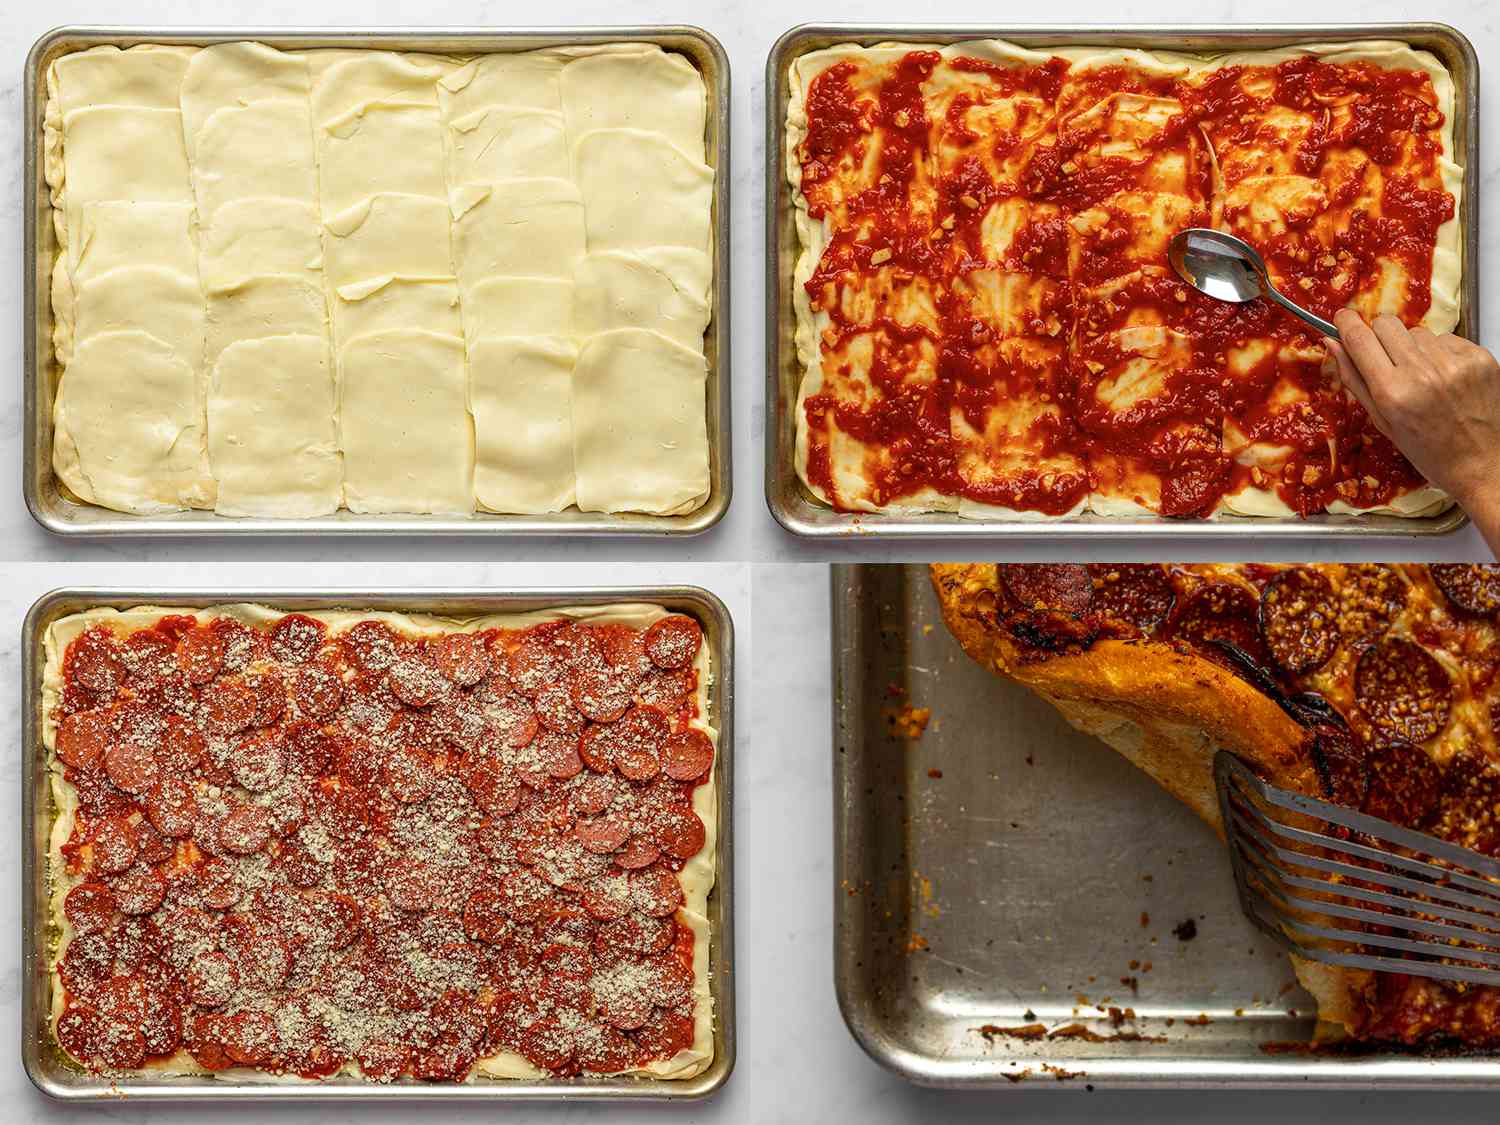 A four-image collage. The top left image shows mozzarella slices shingled evenly over the surface of the pizza dough. The top right image shows a hand holding a spoon spreading sauce over the surface of the cheese slices. The bottom left image shows pepperoni slices spread evenly over surface of the pizza, and sprinkled with half of the Romano cheese. The bottom right image shows the bottom left corner of the pizza being lifted with a spatula after it has baked for about ten minutes, showing off the golden brown bottom of the crust.